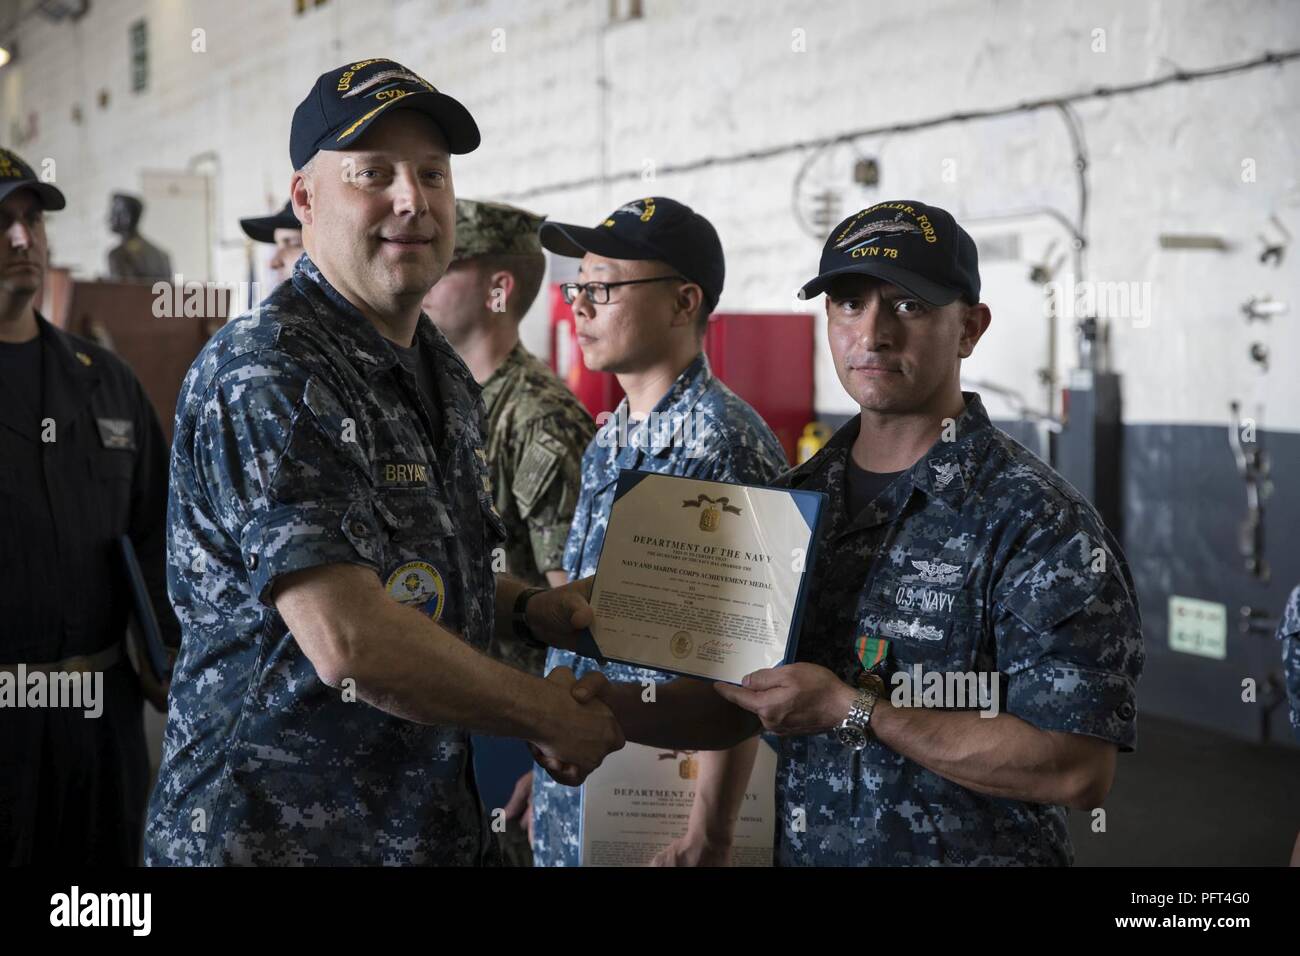 NORFOLK, Va. (May 24, 2018) -- Aviation Structural Mechanic 1st Class Francisco Quezada, from Houston, assigned to USS Gerald R. Ford’s (CVN 78) aviation intermediate maintenance department, receives a Navy and Marine Corps Achievement Medal certificate from Cmdr. Steven Bryant, Ford’s maintenance officer, during an awards ceremony in the ship’s hangar bay. Stock Photo